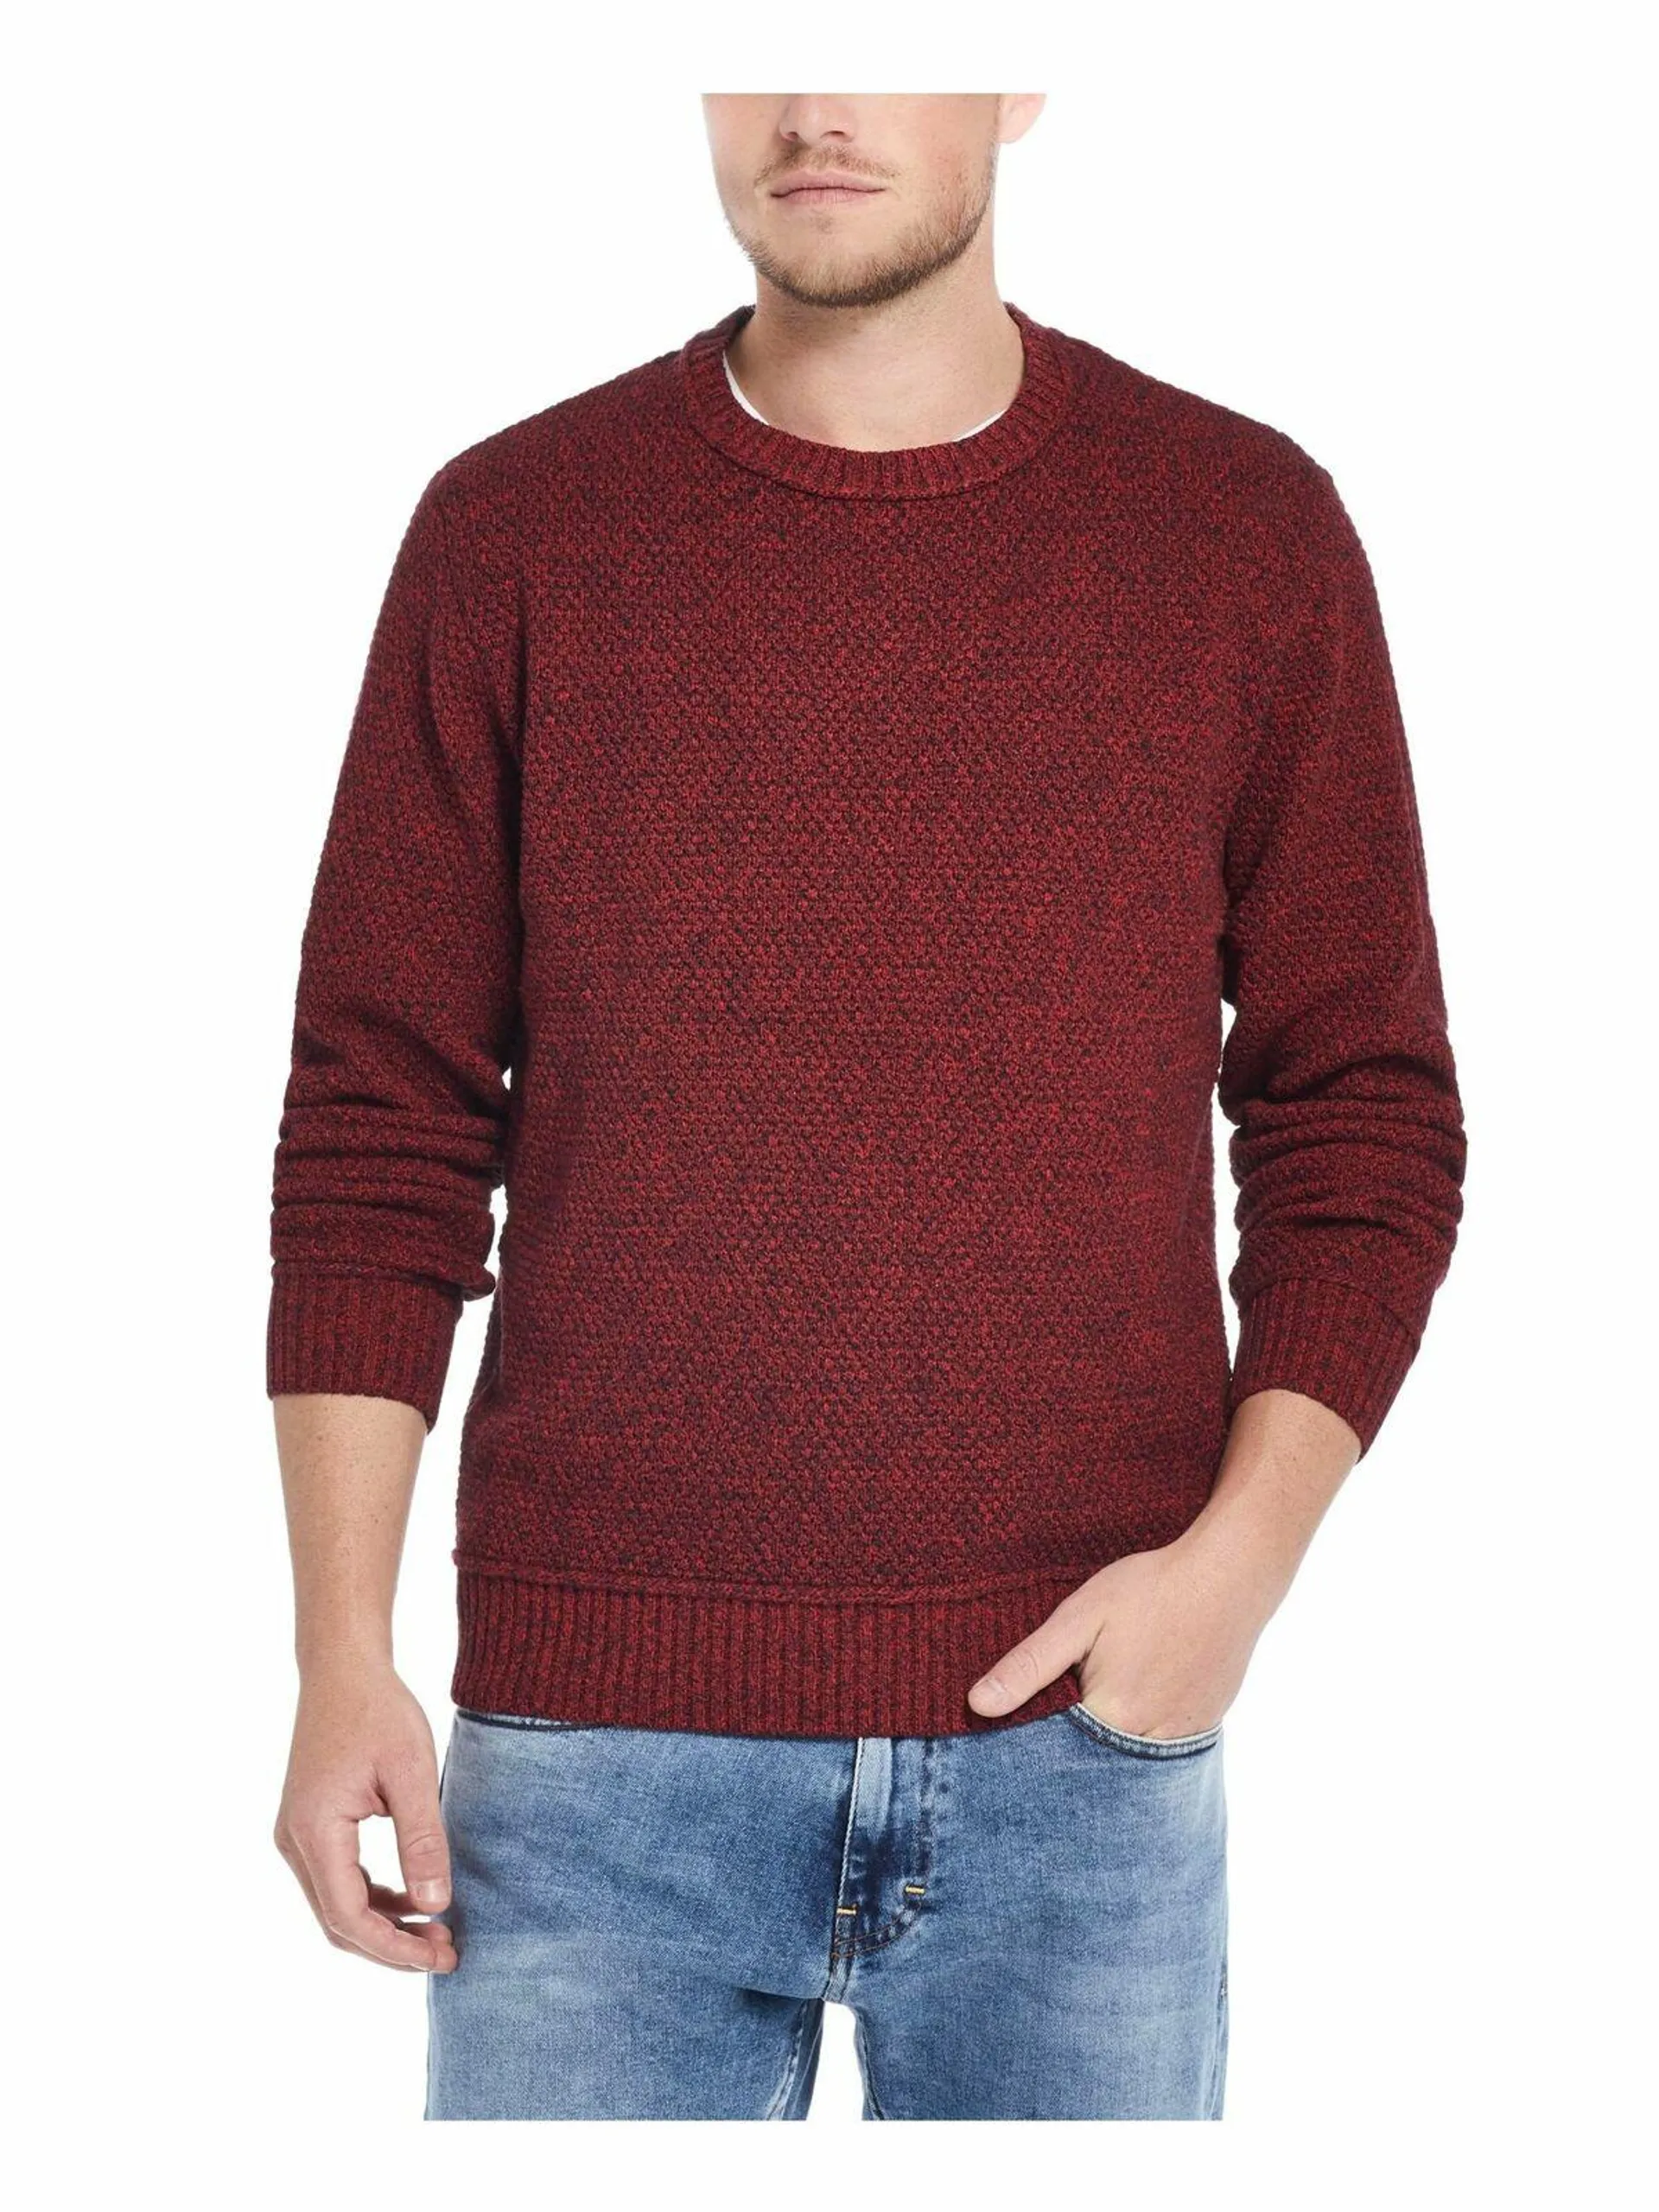 Weatherproof Men's Solid Mesh Stitch Sweater Red Size Extra Large